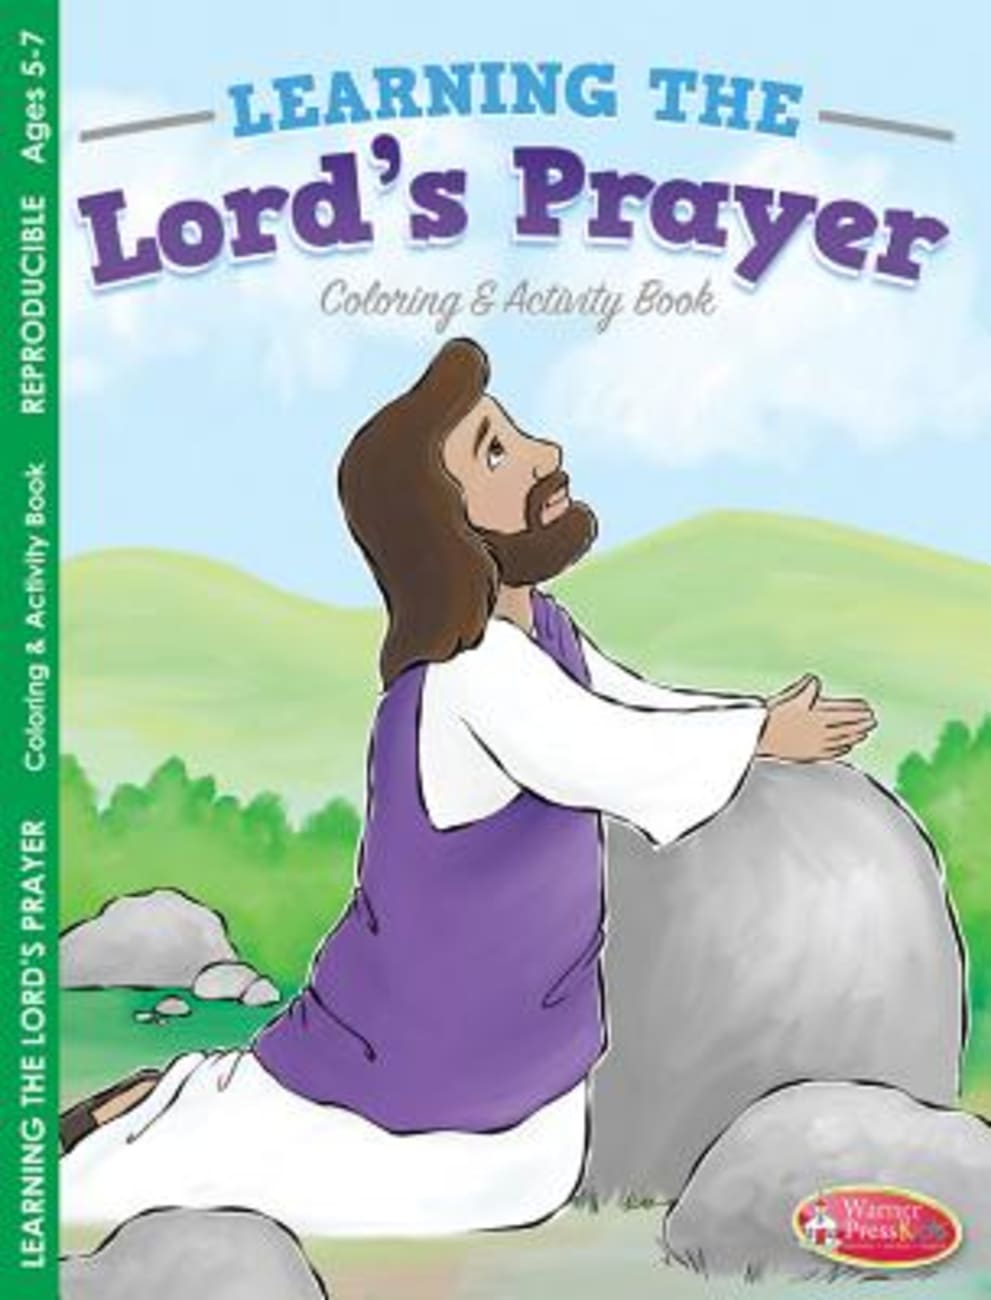 Learning the Lord's Prayer Coloring & Activity Book (Ages 5-7, Reproducible) (Warner Press Colouring & Activity Books Series) Paperback